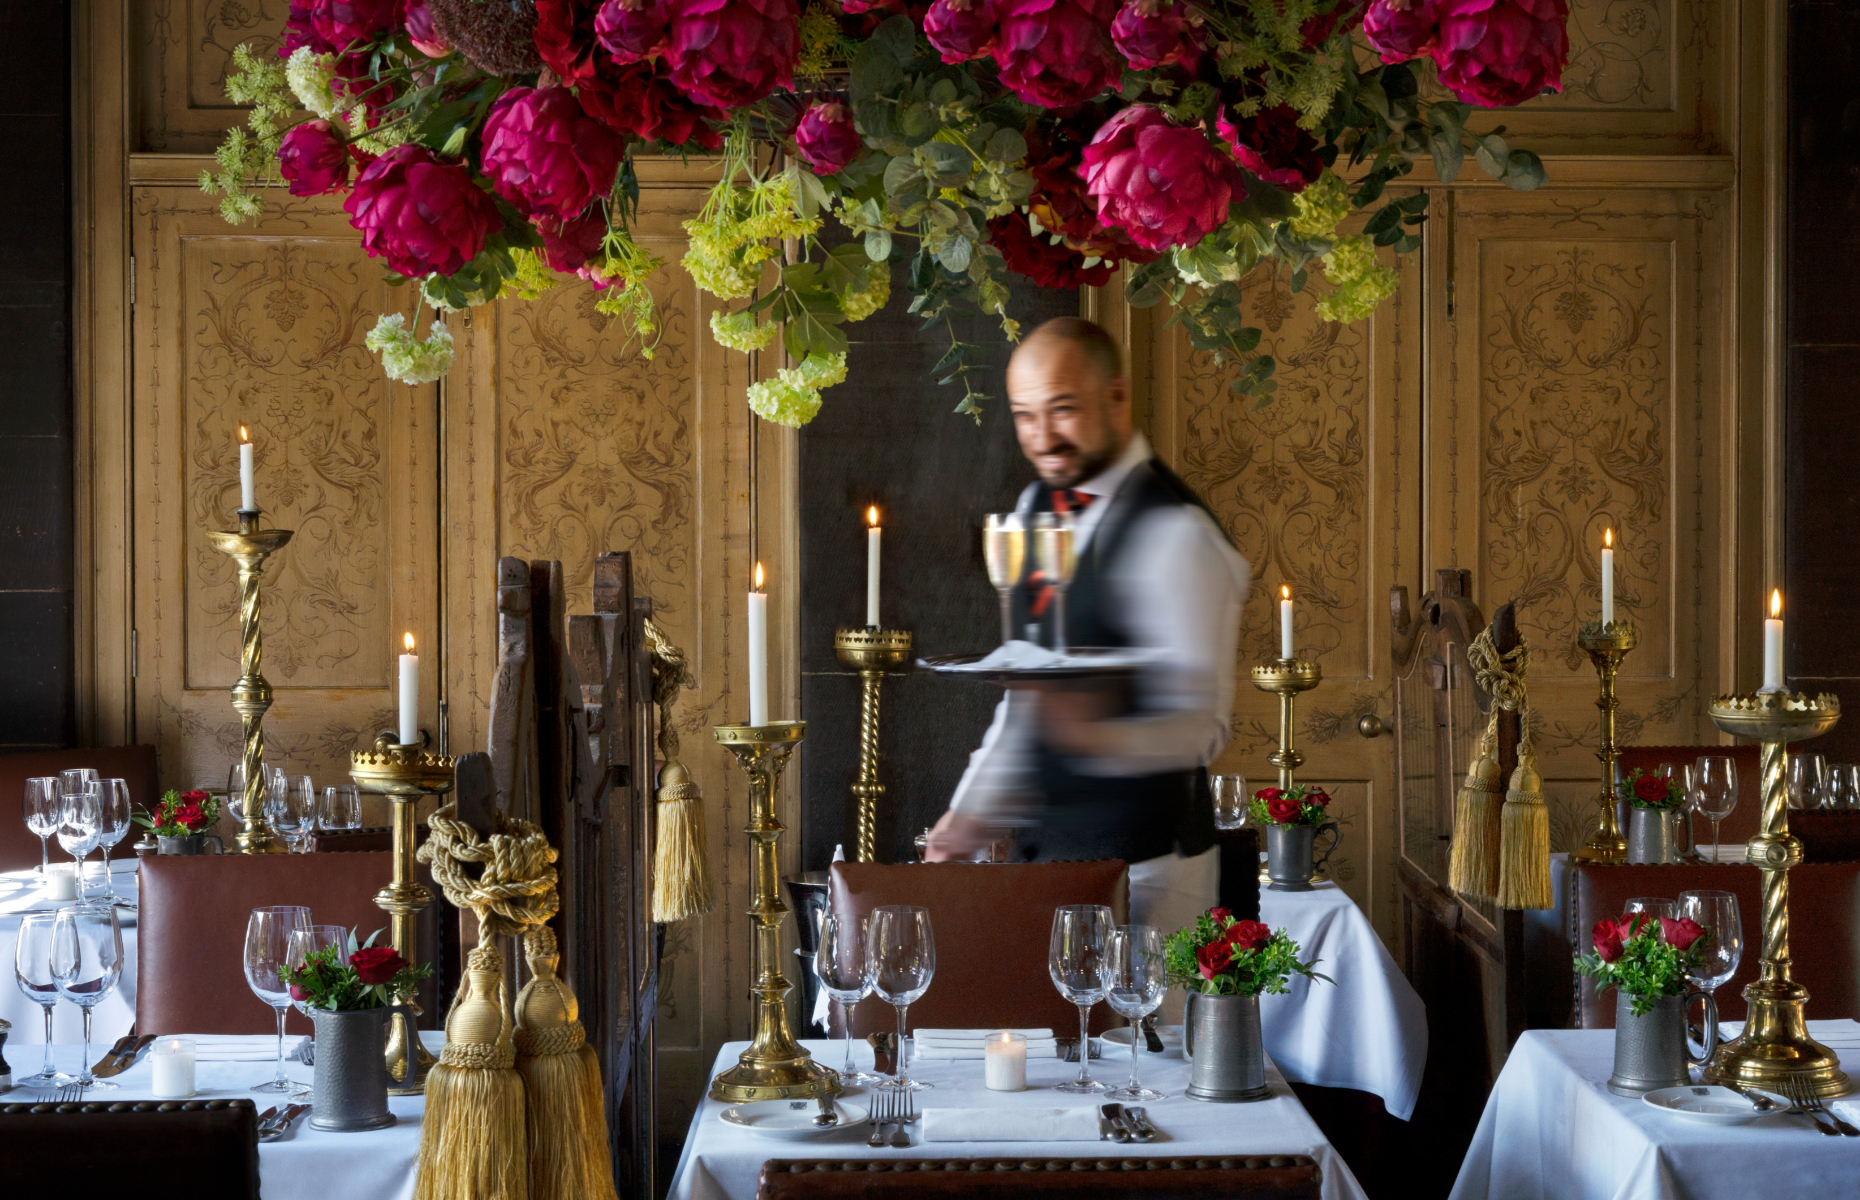 The Witchery by the Castle (Image courtesy of Visit Scotland)